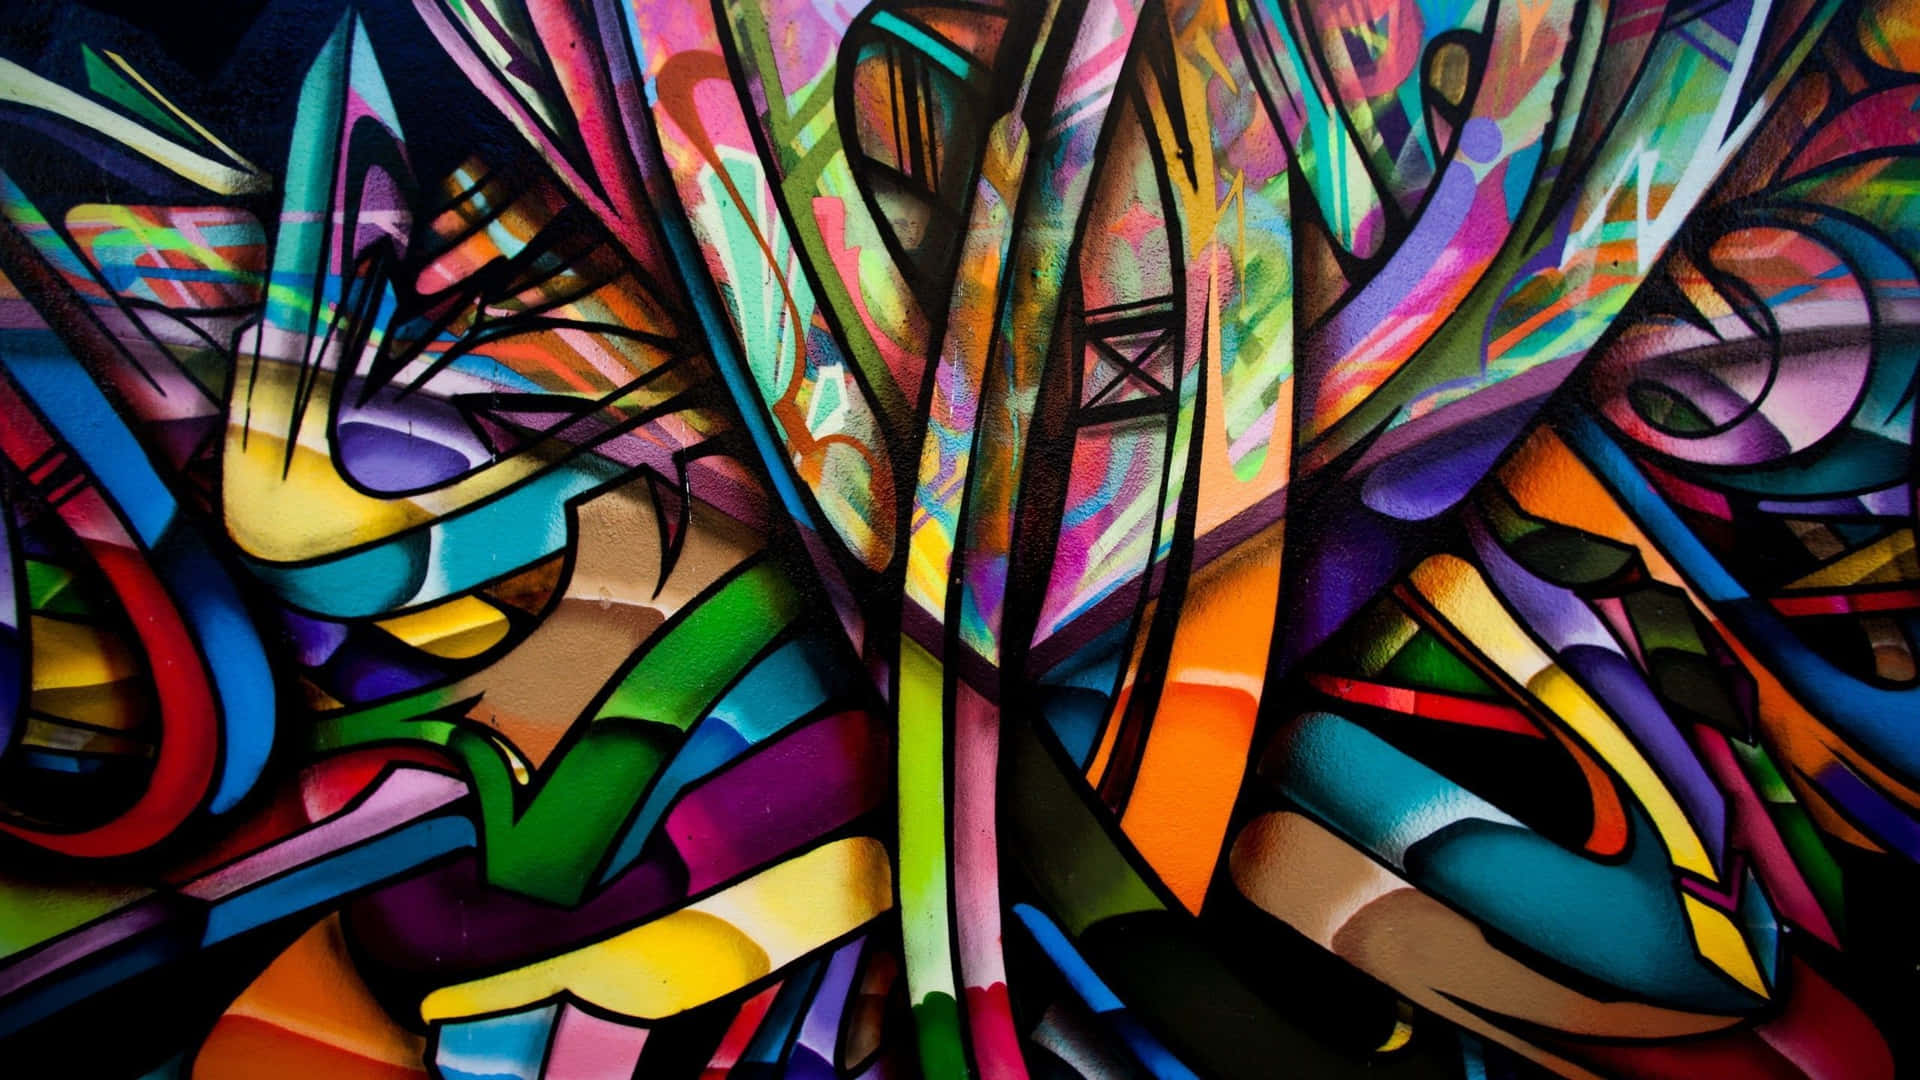 Colorful Abstract Art In Graffiti Style Wallpaper